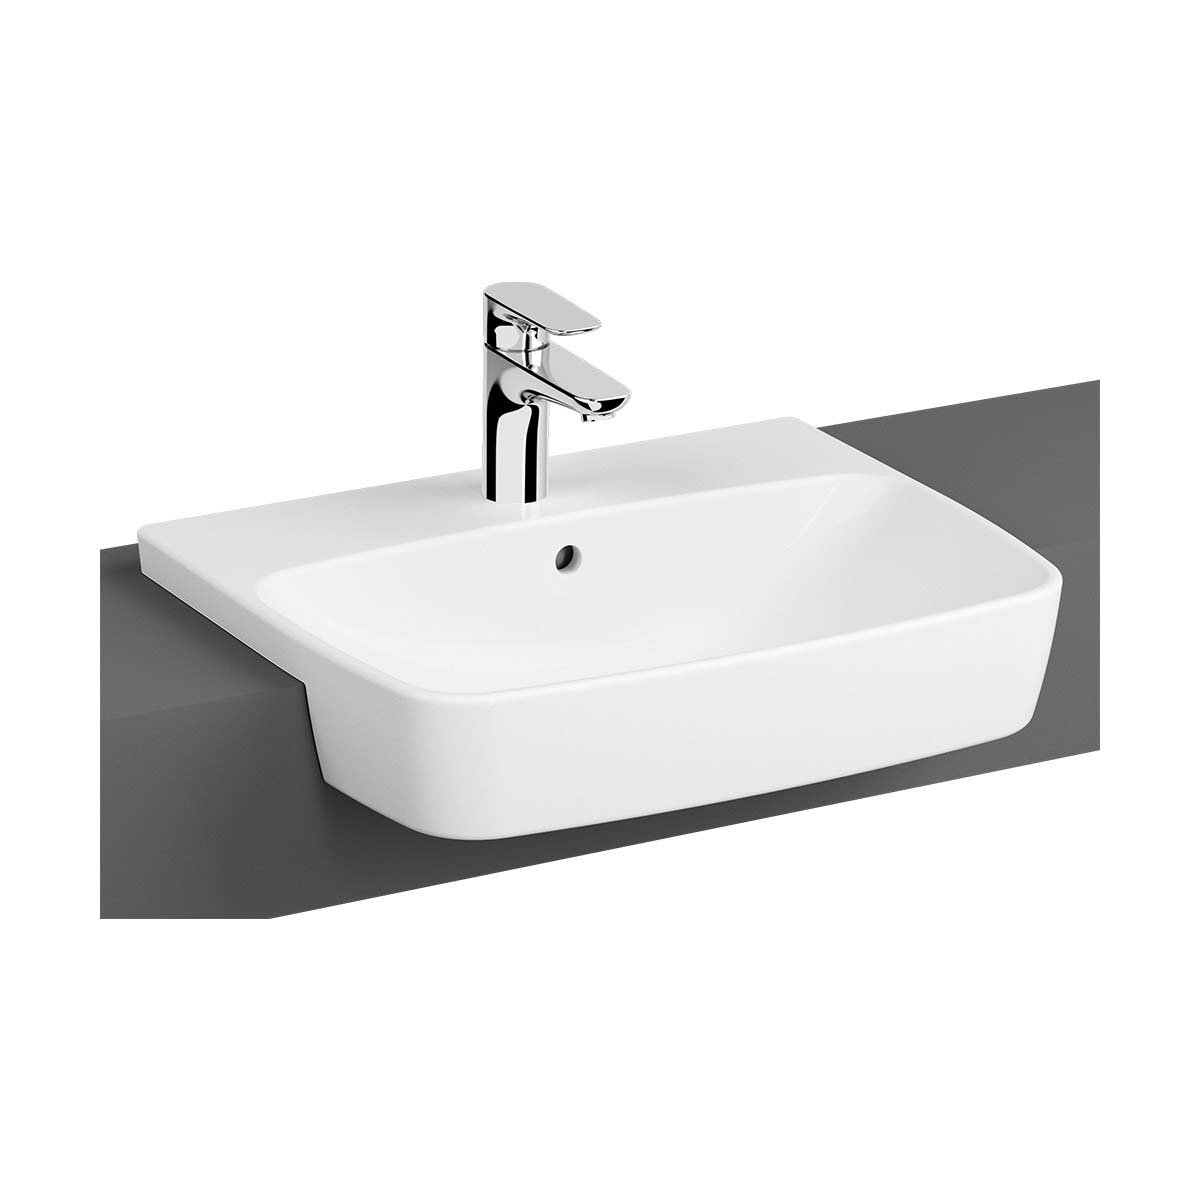 Semi-Recessed Basin, 55 cm, One Tap Hole, With Overflow Hole